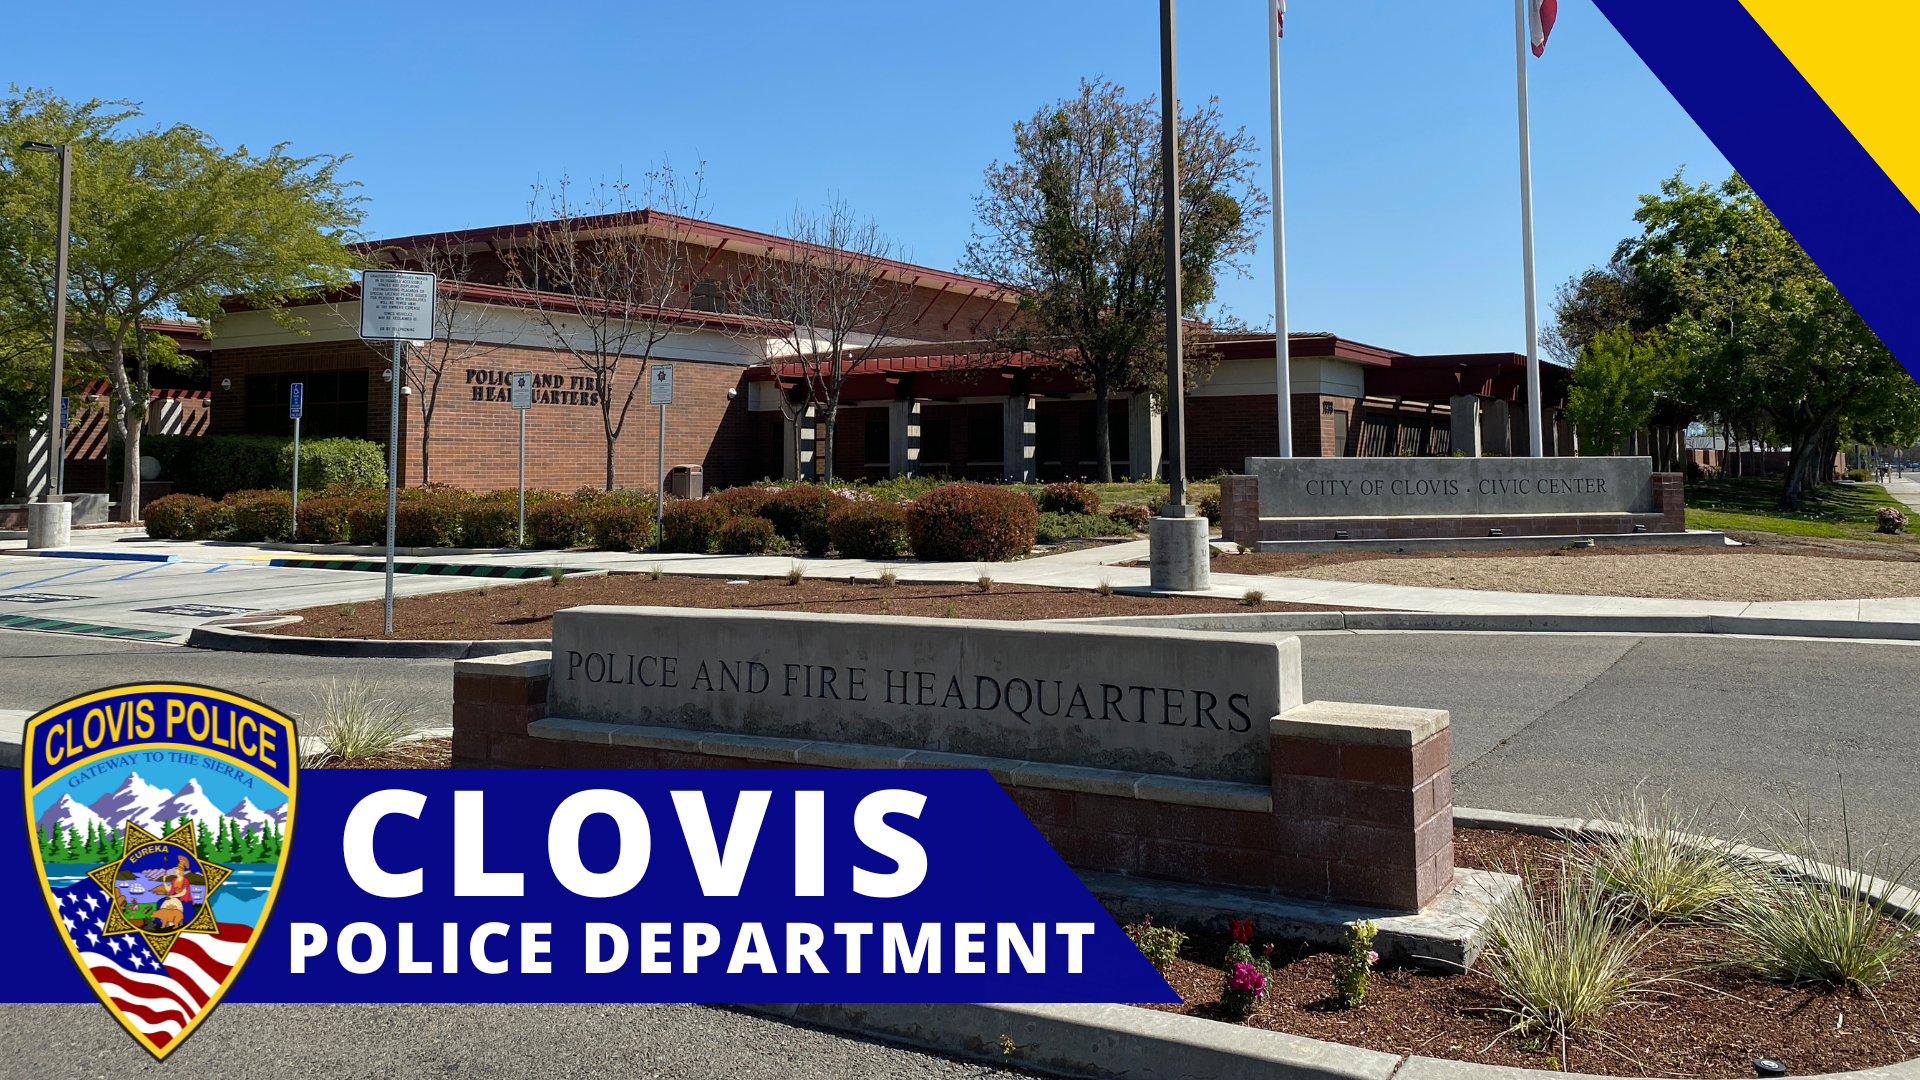 Photo showing the front of the Clovis Police & Fire headquarters